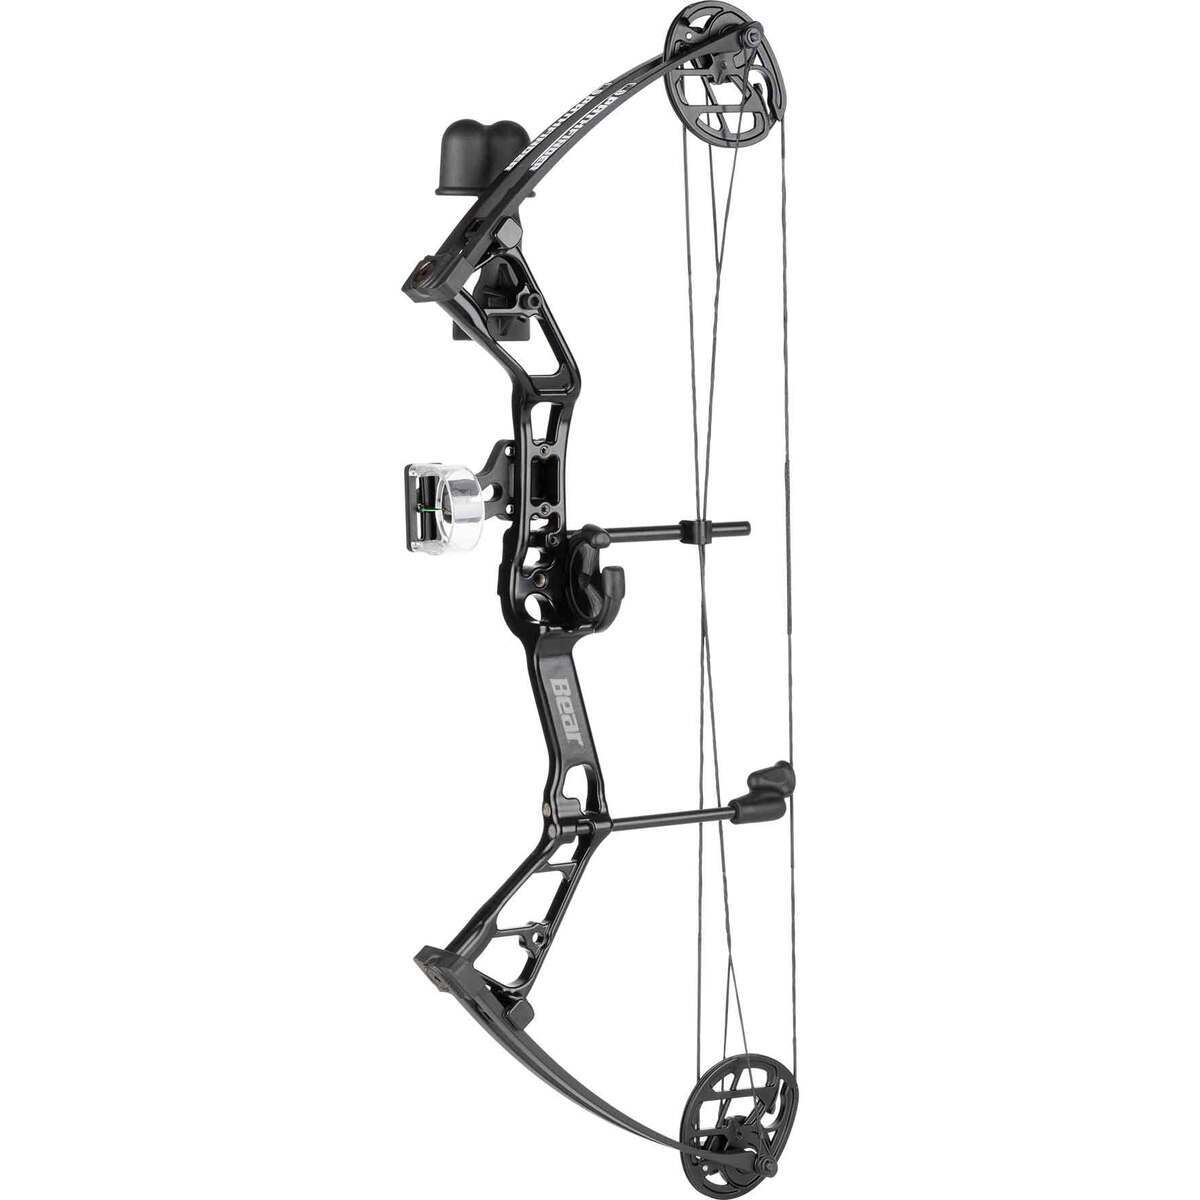 Bear Archery Pathfinder 15-19lbs Right Hand Black Youth Compound